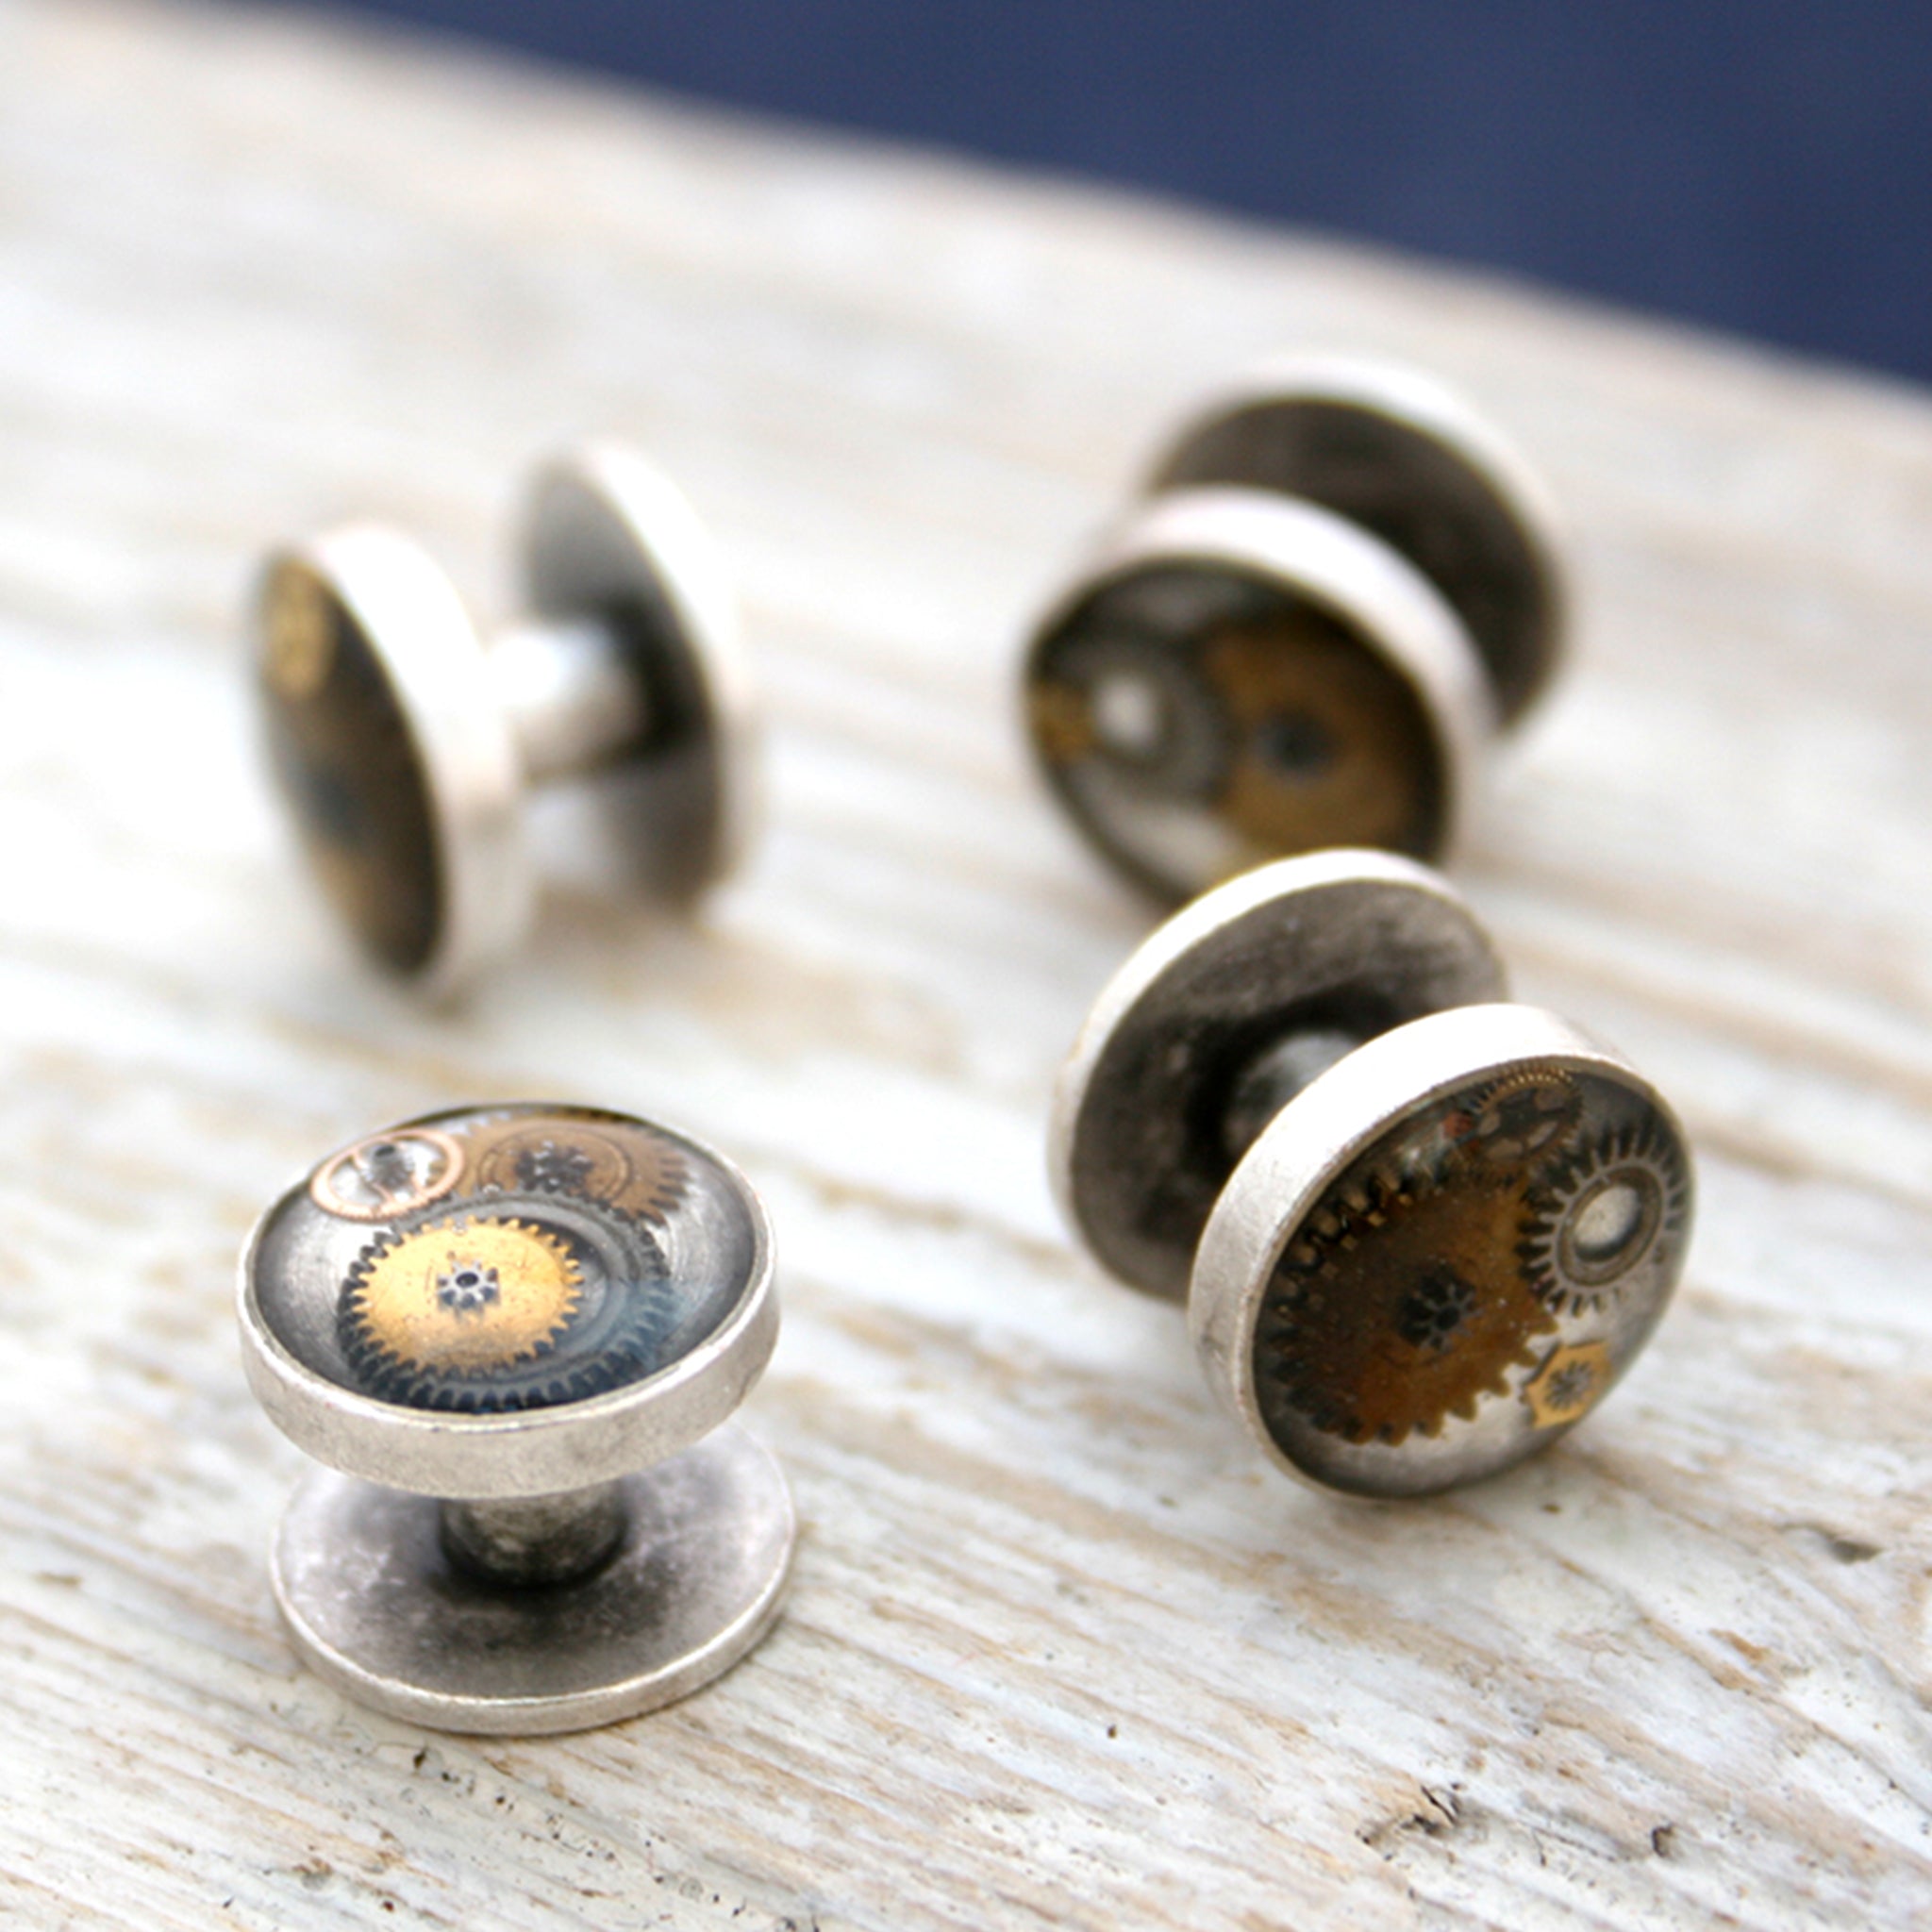 Antique Silver tone tuxedo studs featuring vintage watch parts filled with resin